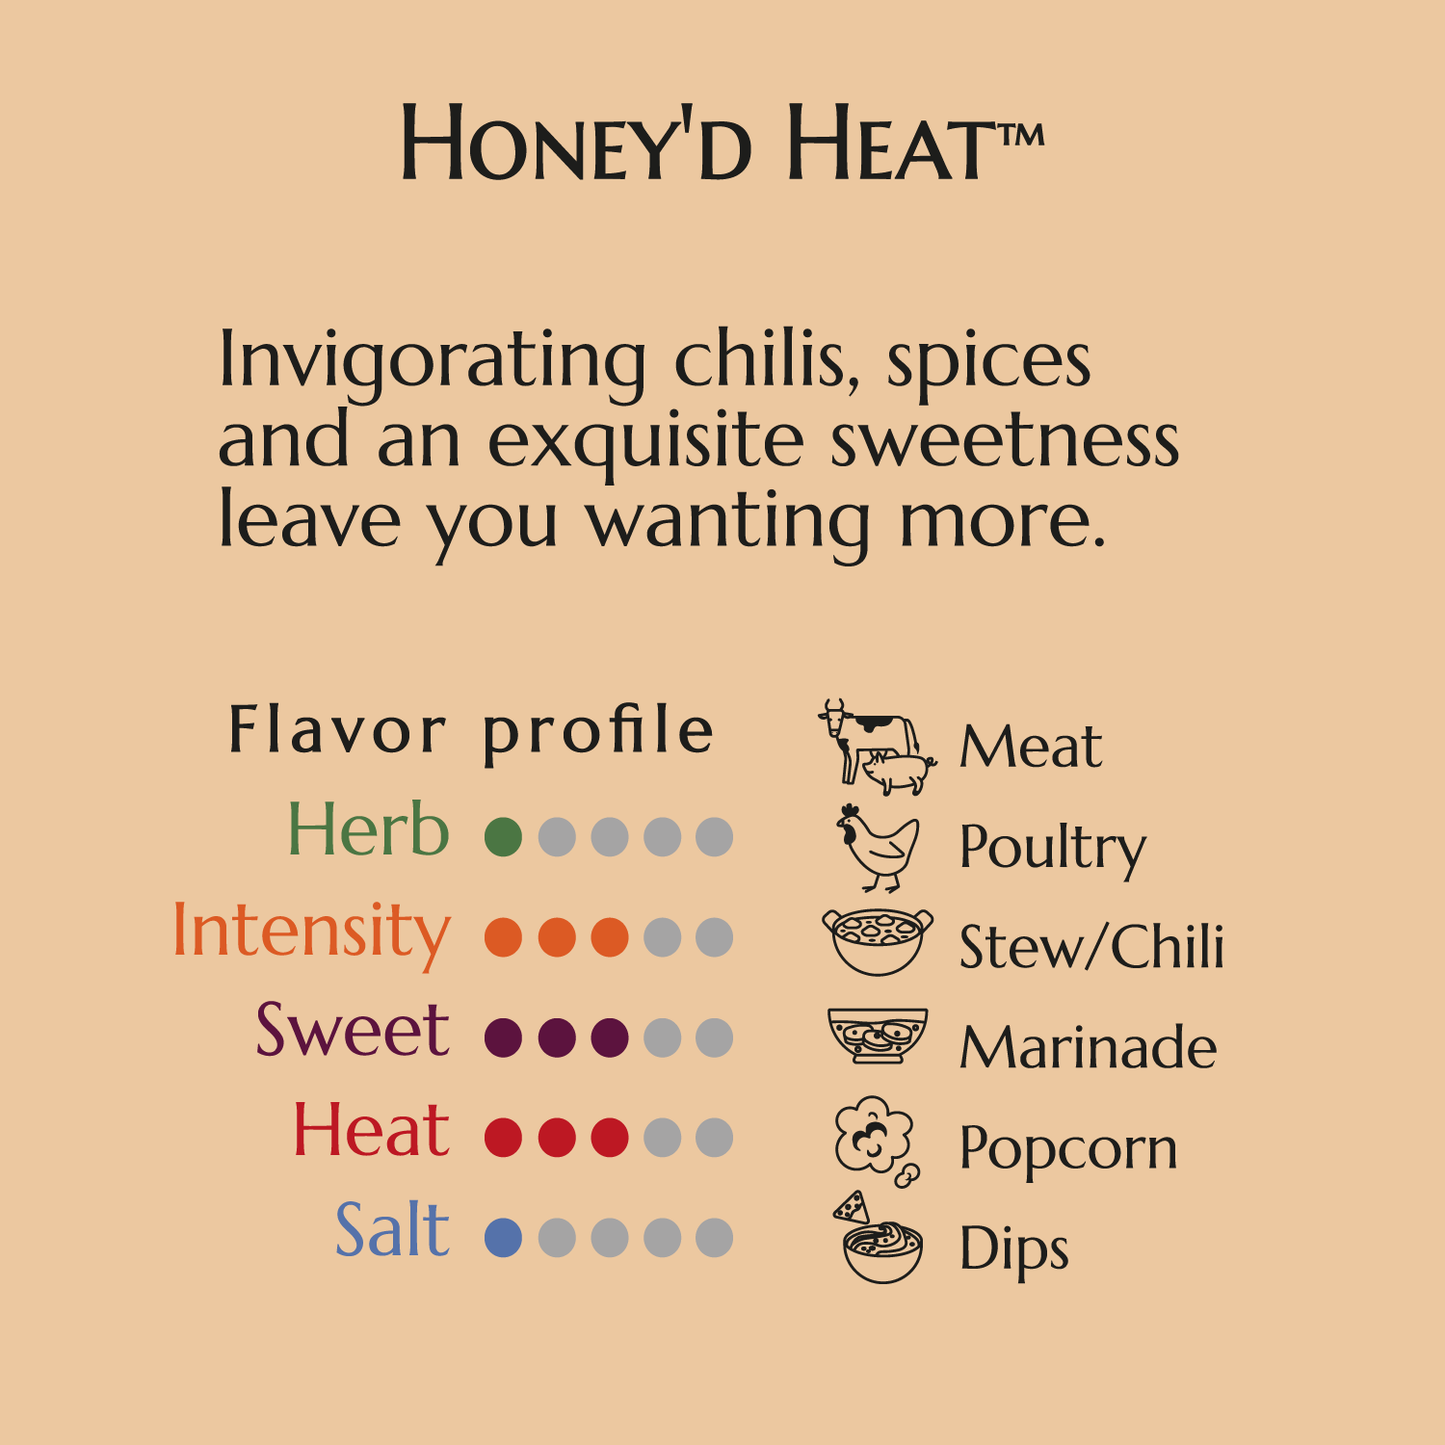 Honey'd Heat, Aleppo and cayenne peppers, savory garden vegetables, spices and a delicate sweet balance.  Low FODMAP, gluten free.